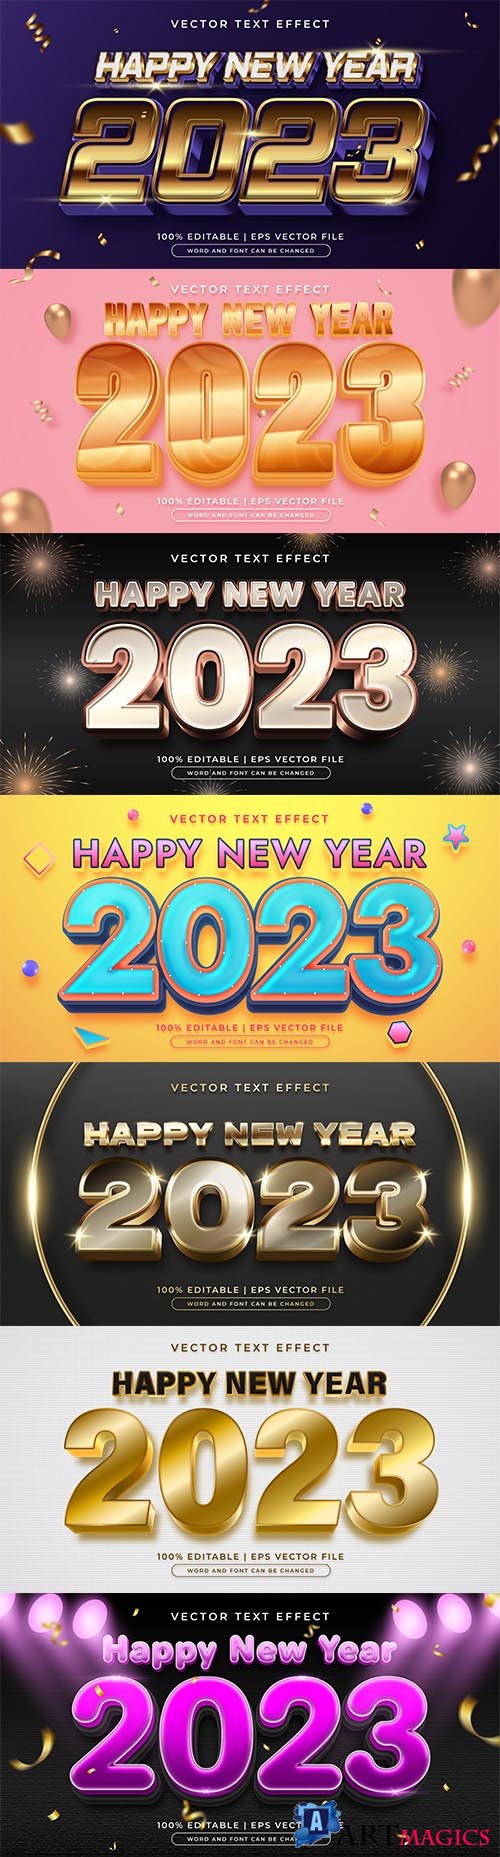 Gold new year 2023 editable text effect vector template